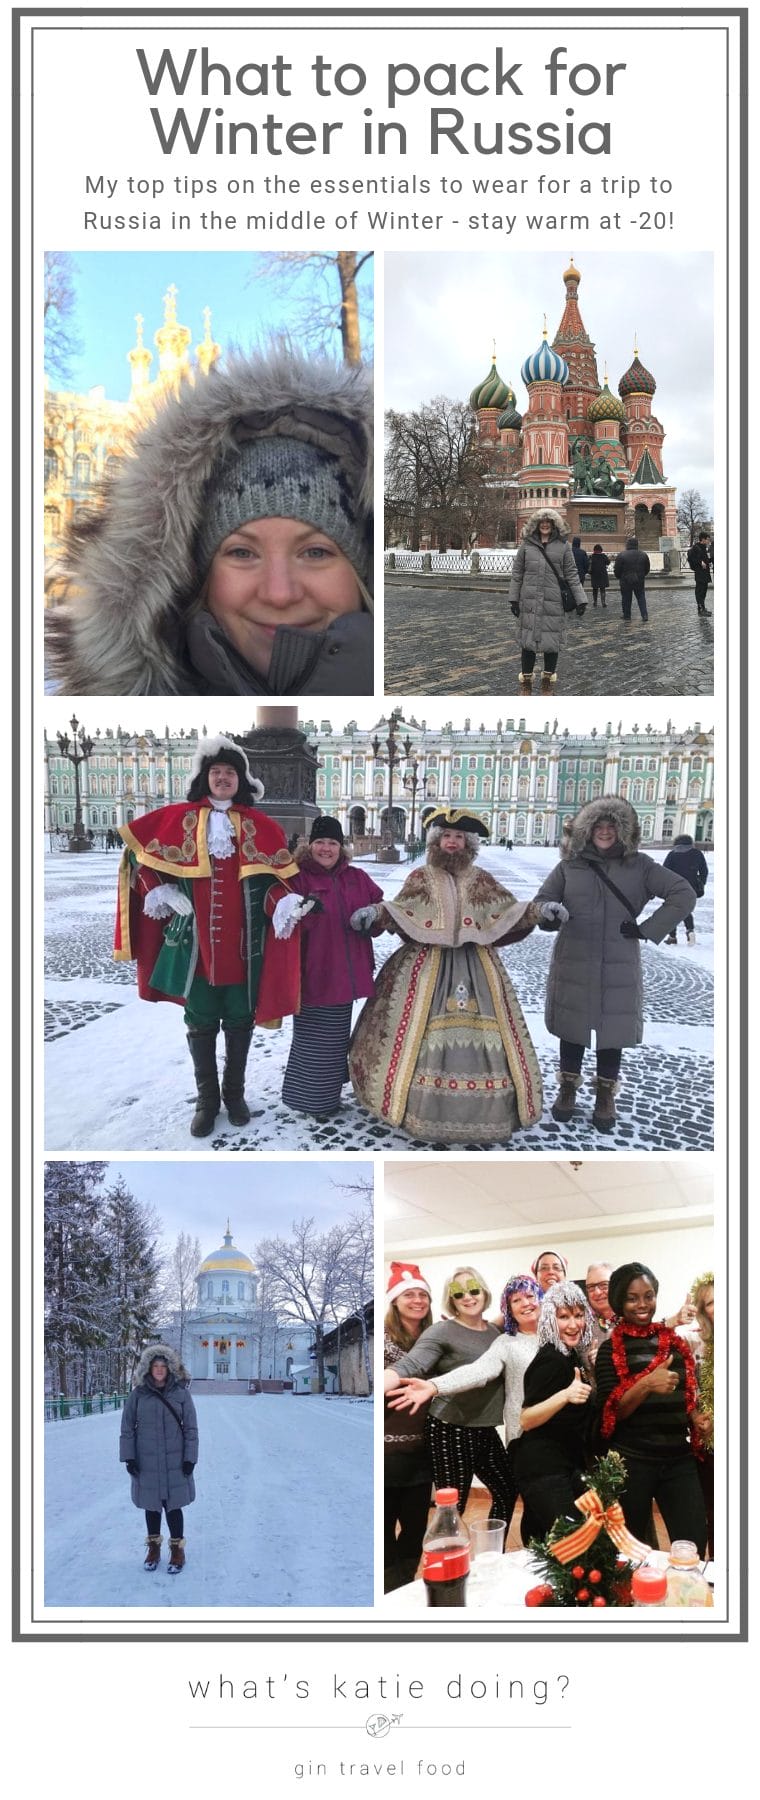 What to pack for Winter in Russia - all my top tips to stay warm at -20!